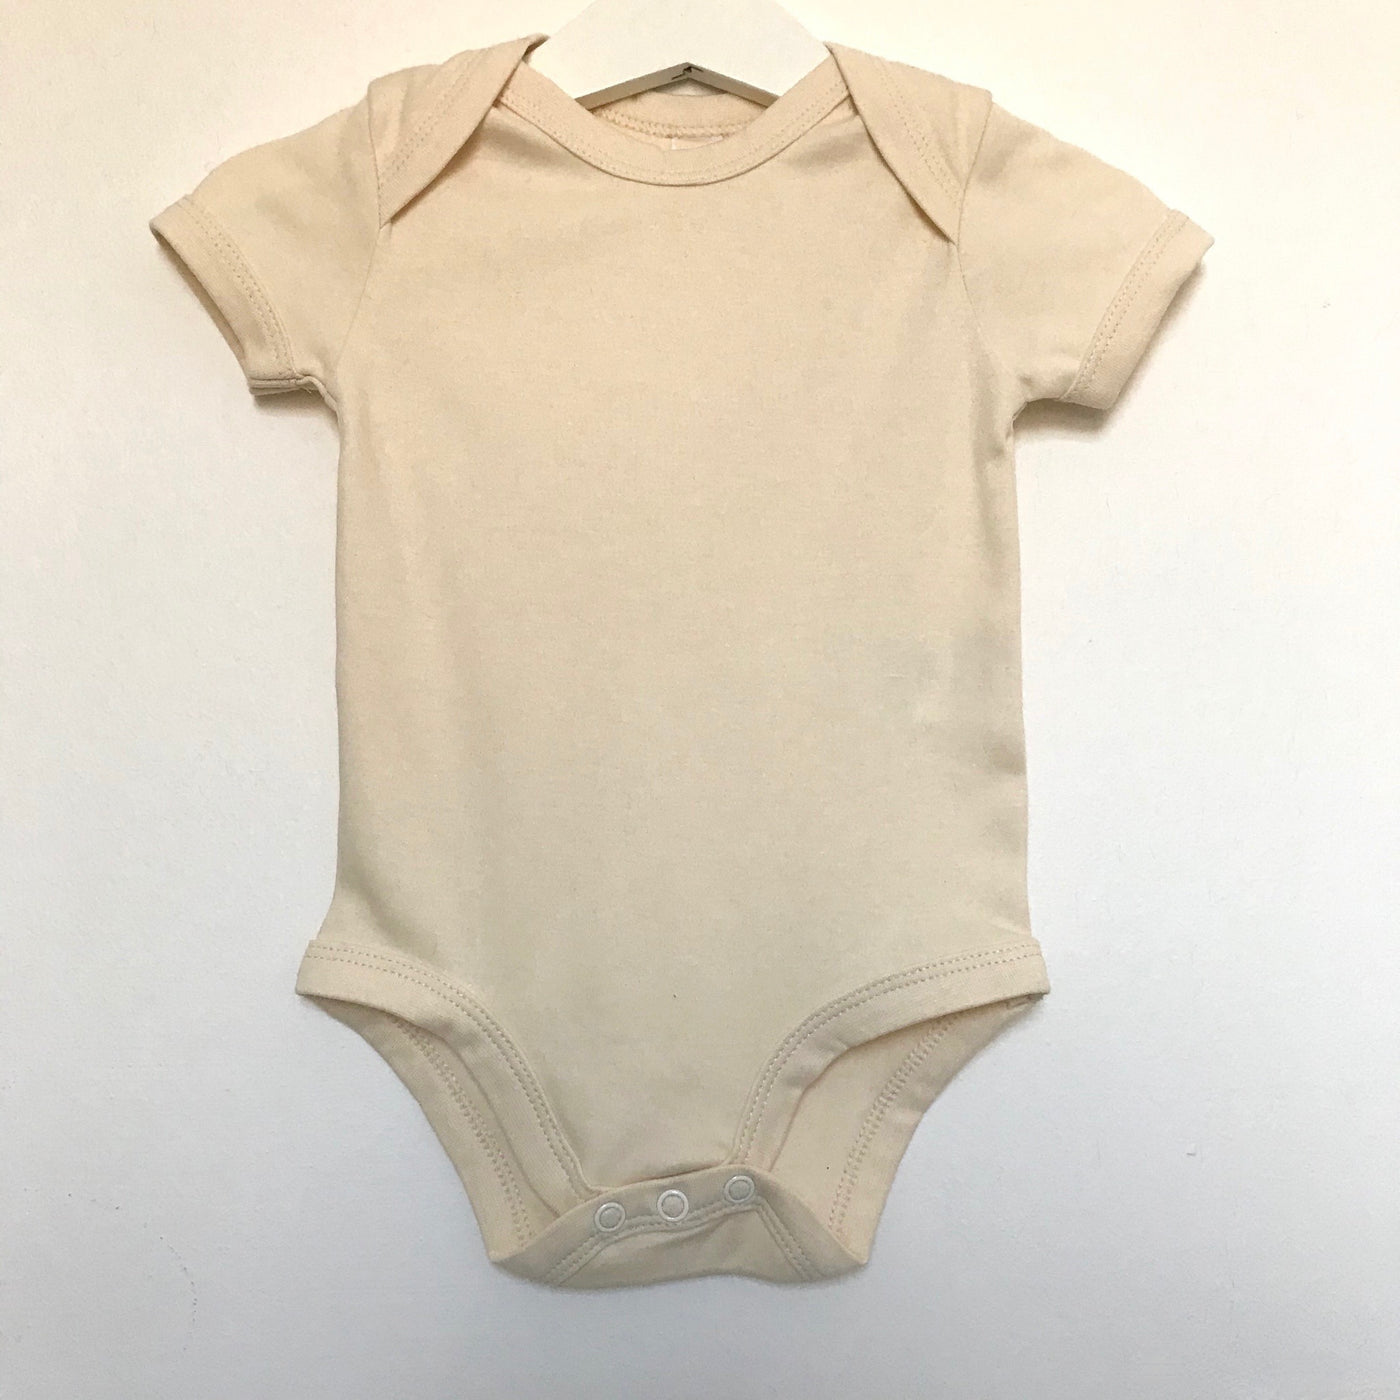 The St Andrews Hamper Company organic cotton baby bodysuit in natural, undyed, unbleached colour.